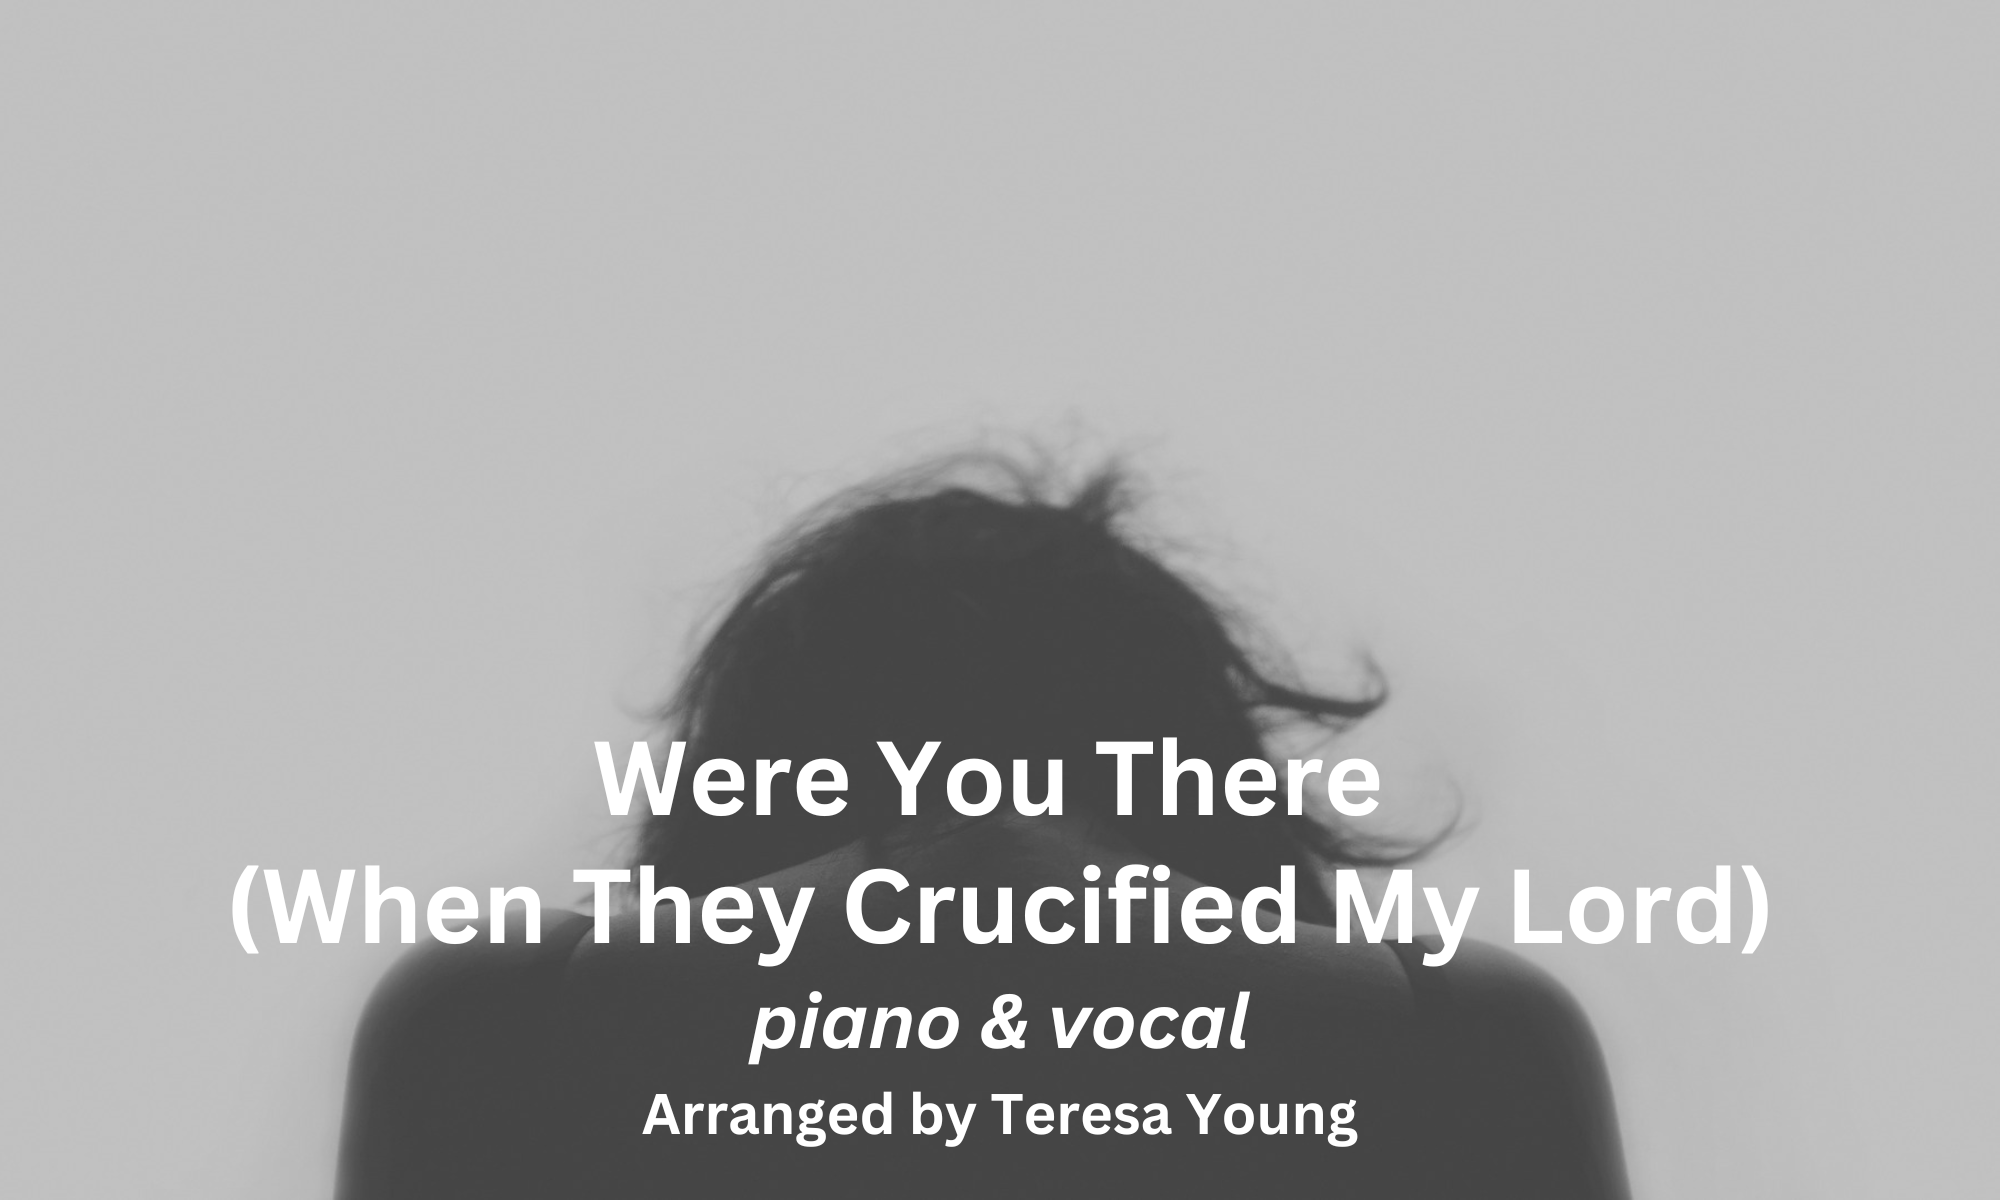 Were You There (When They Crucified My Lord), piano & vocal, arranged by Teresa Young